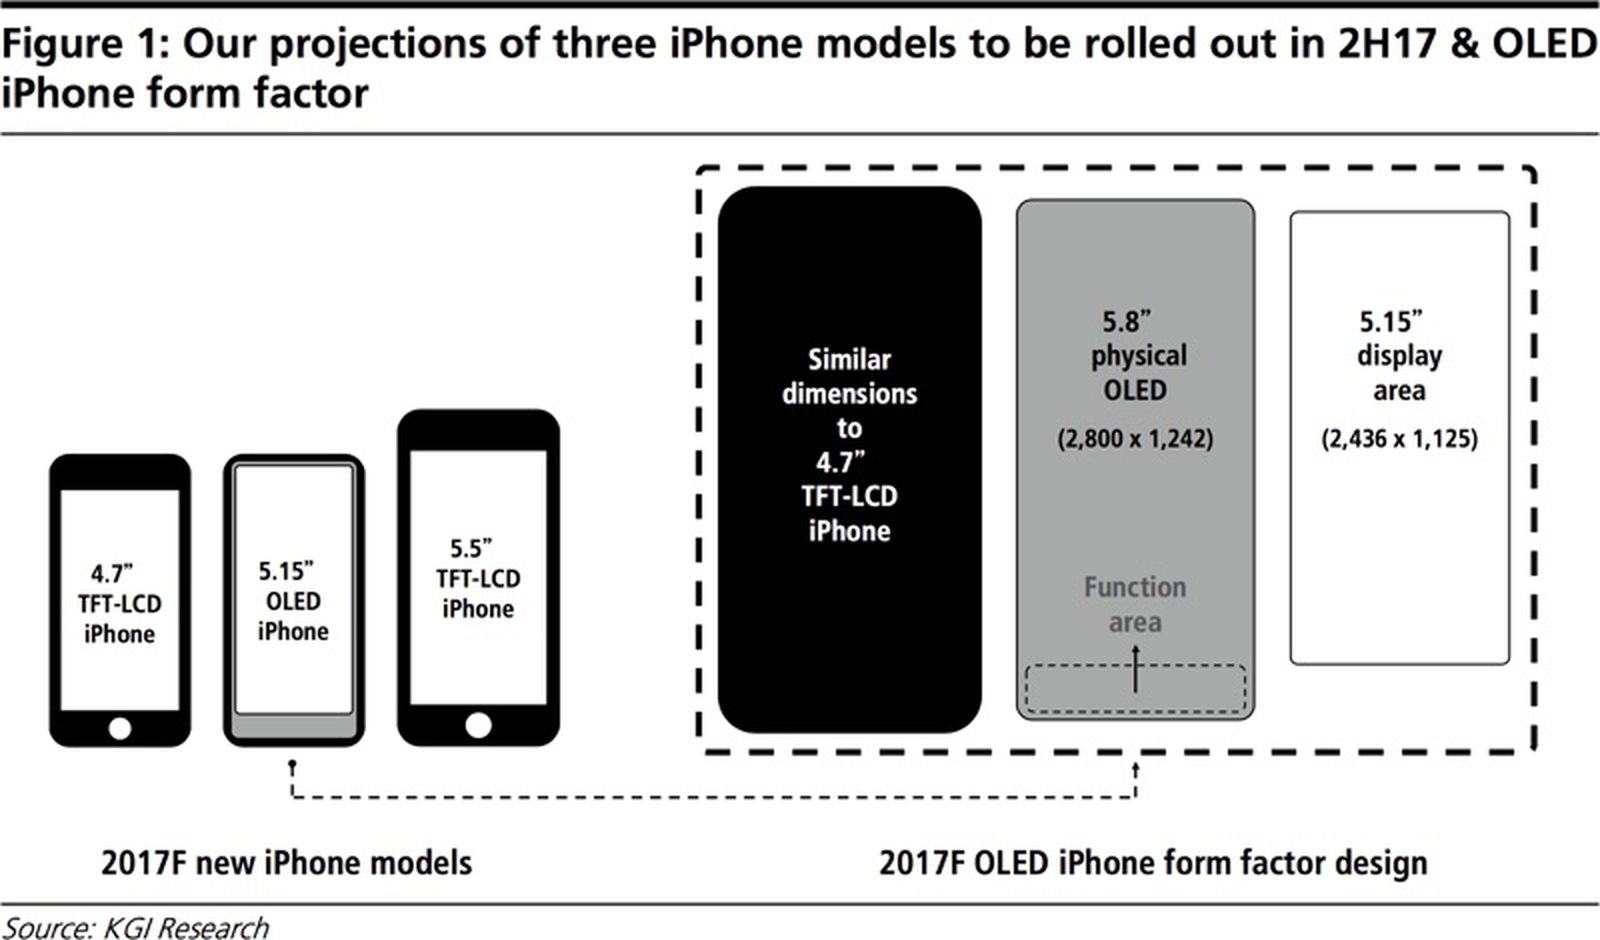 Apple iPhone 8 Plus Technical Specifications